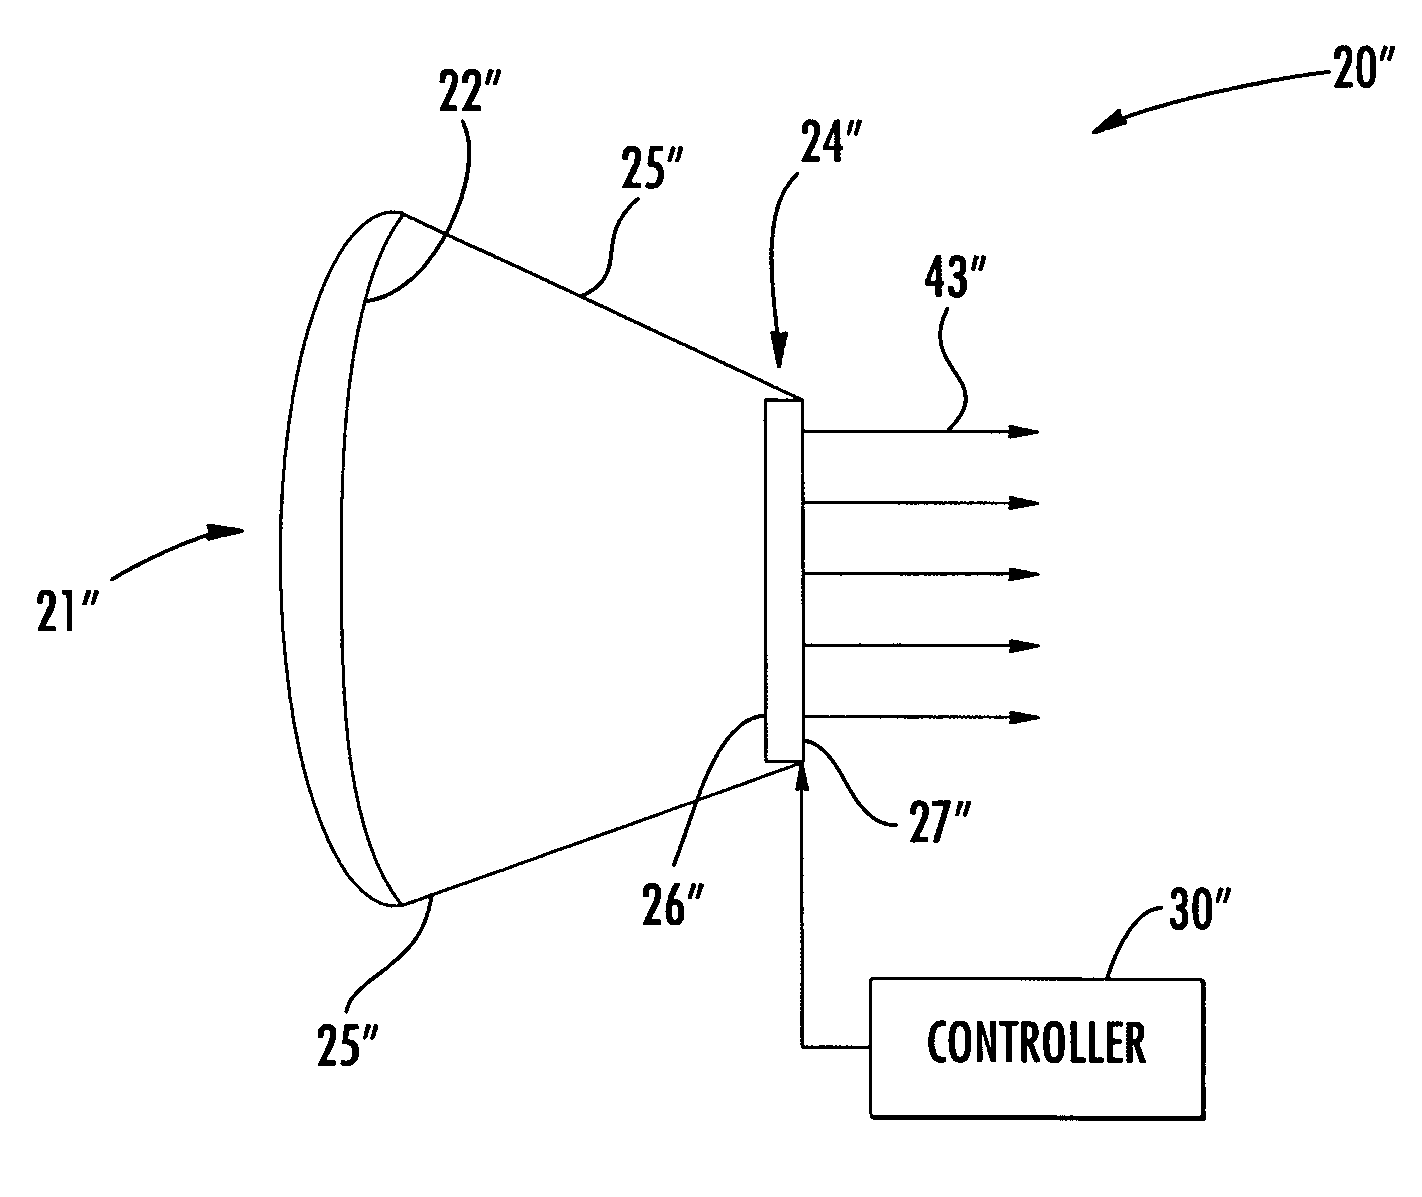 Reflector antenna system including a phased array antenna operable in multiple modes and related methods